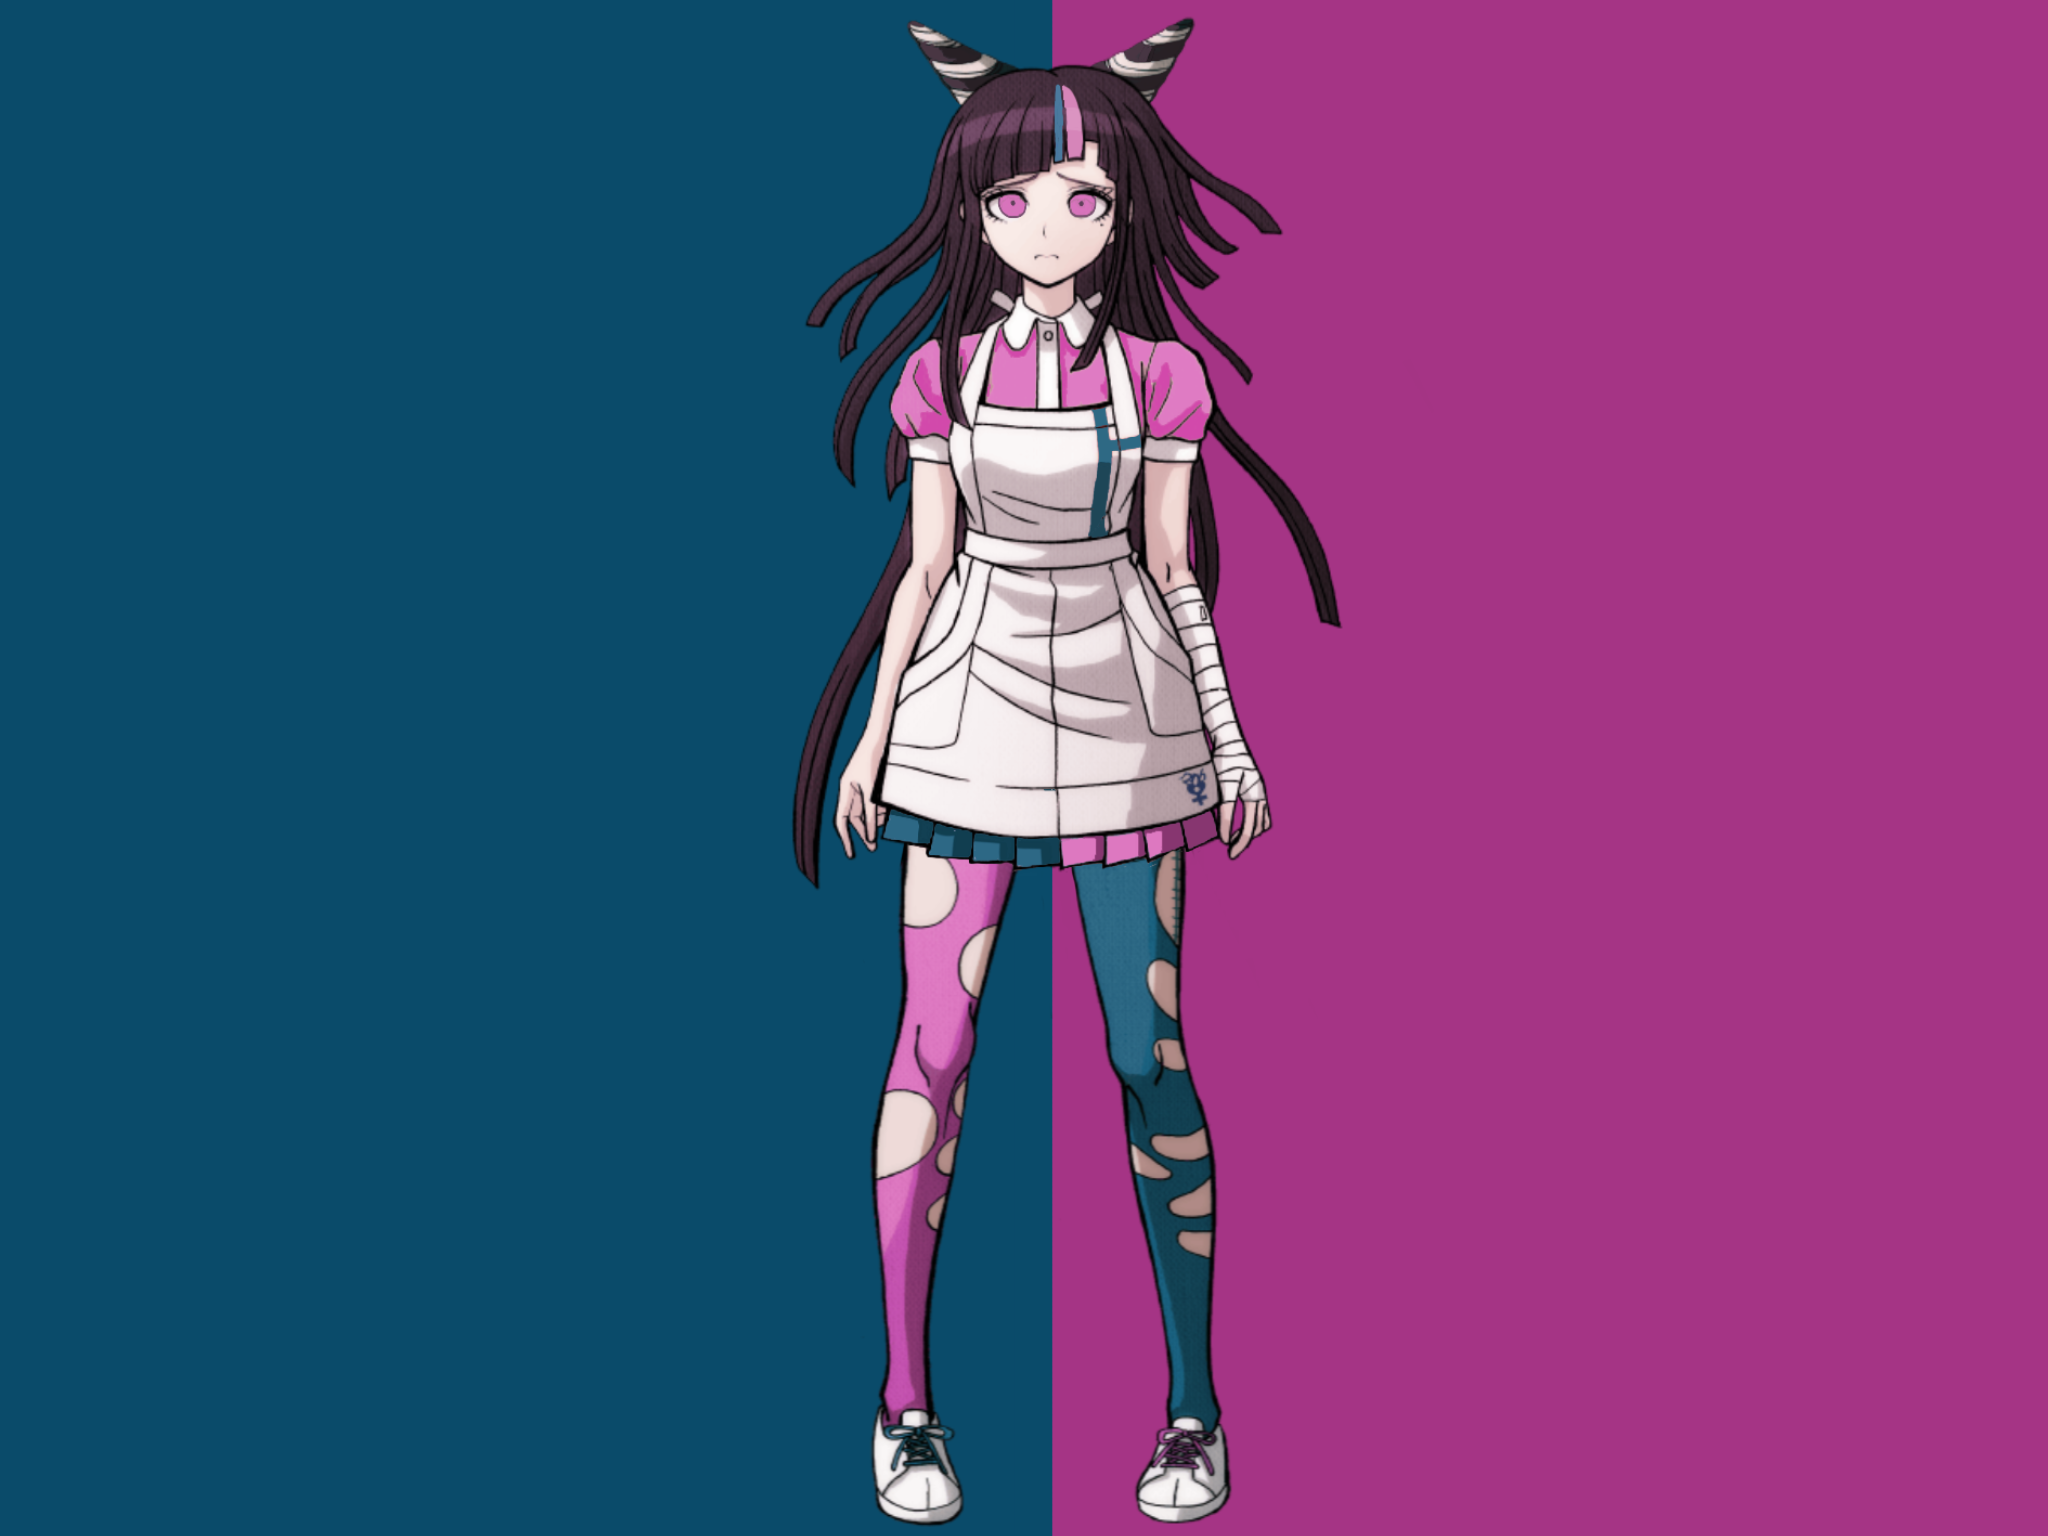 Merging Characters Part Ibuki And Mikan Two Of My Personal